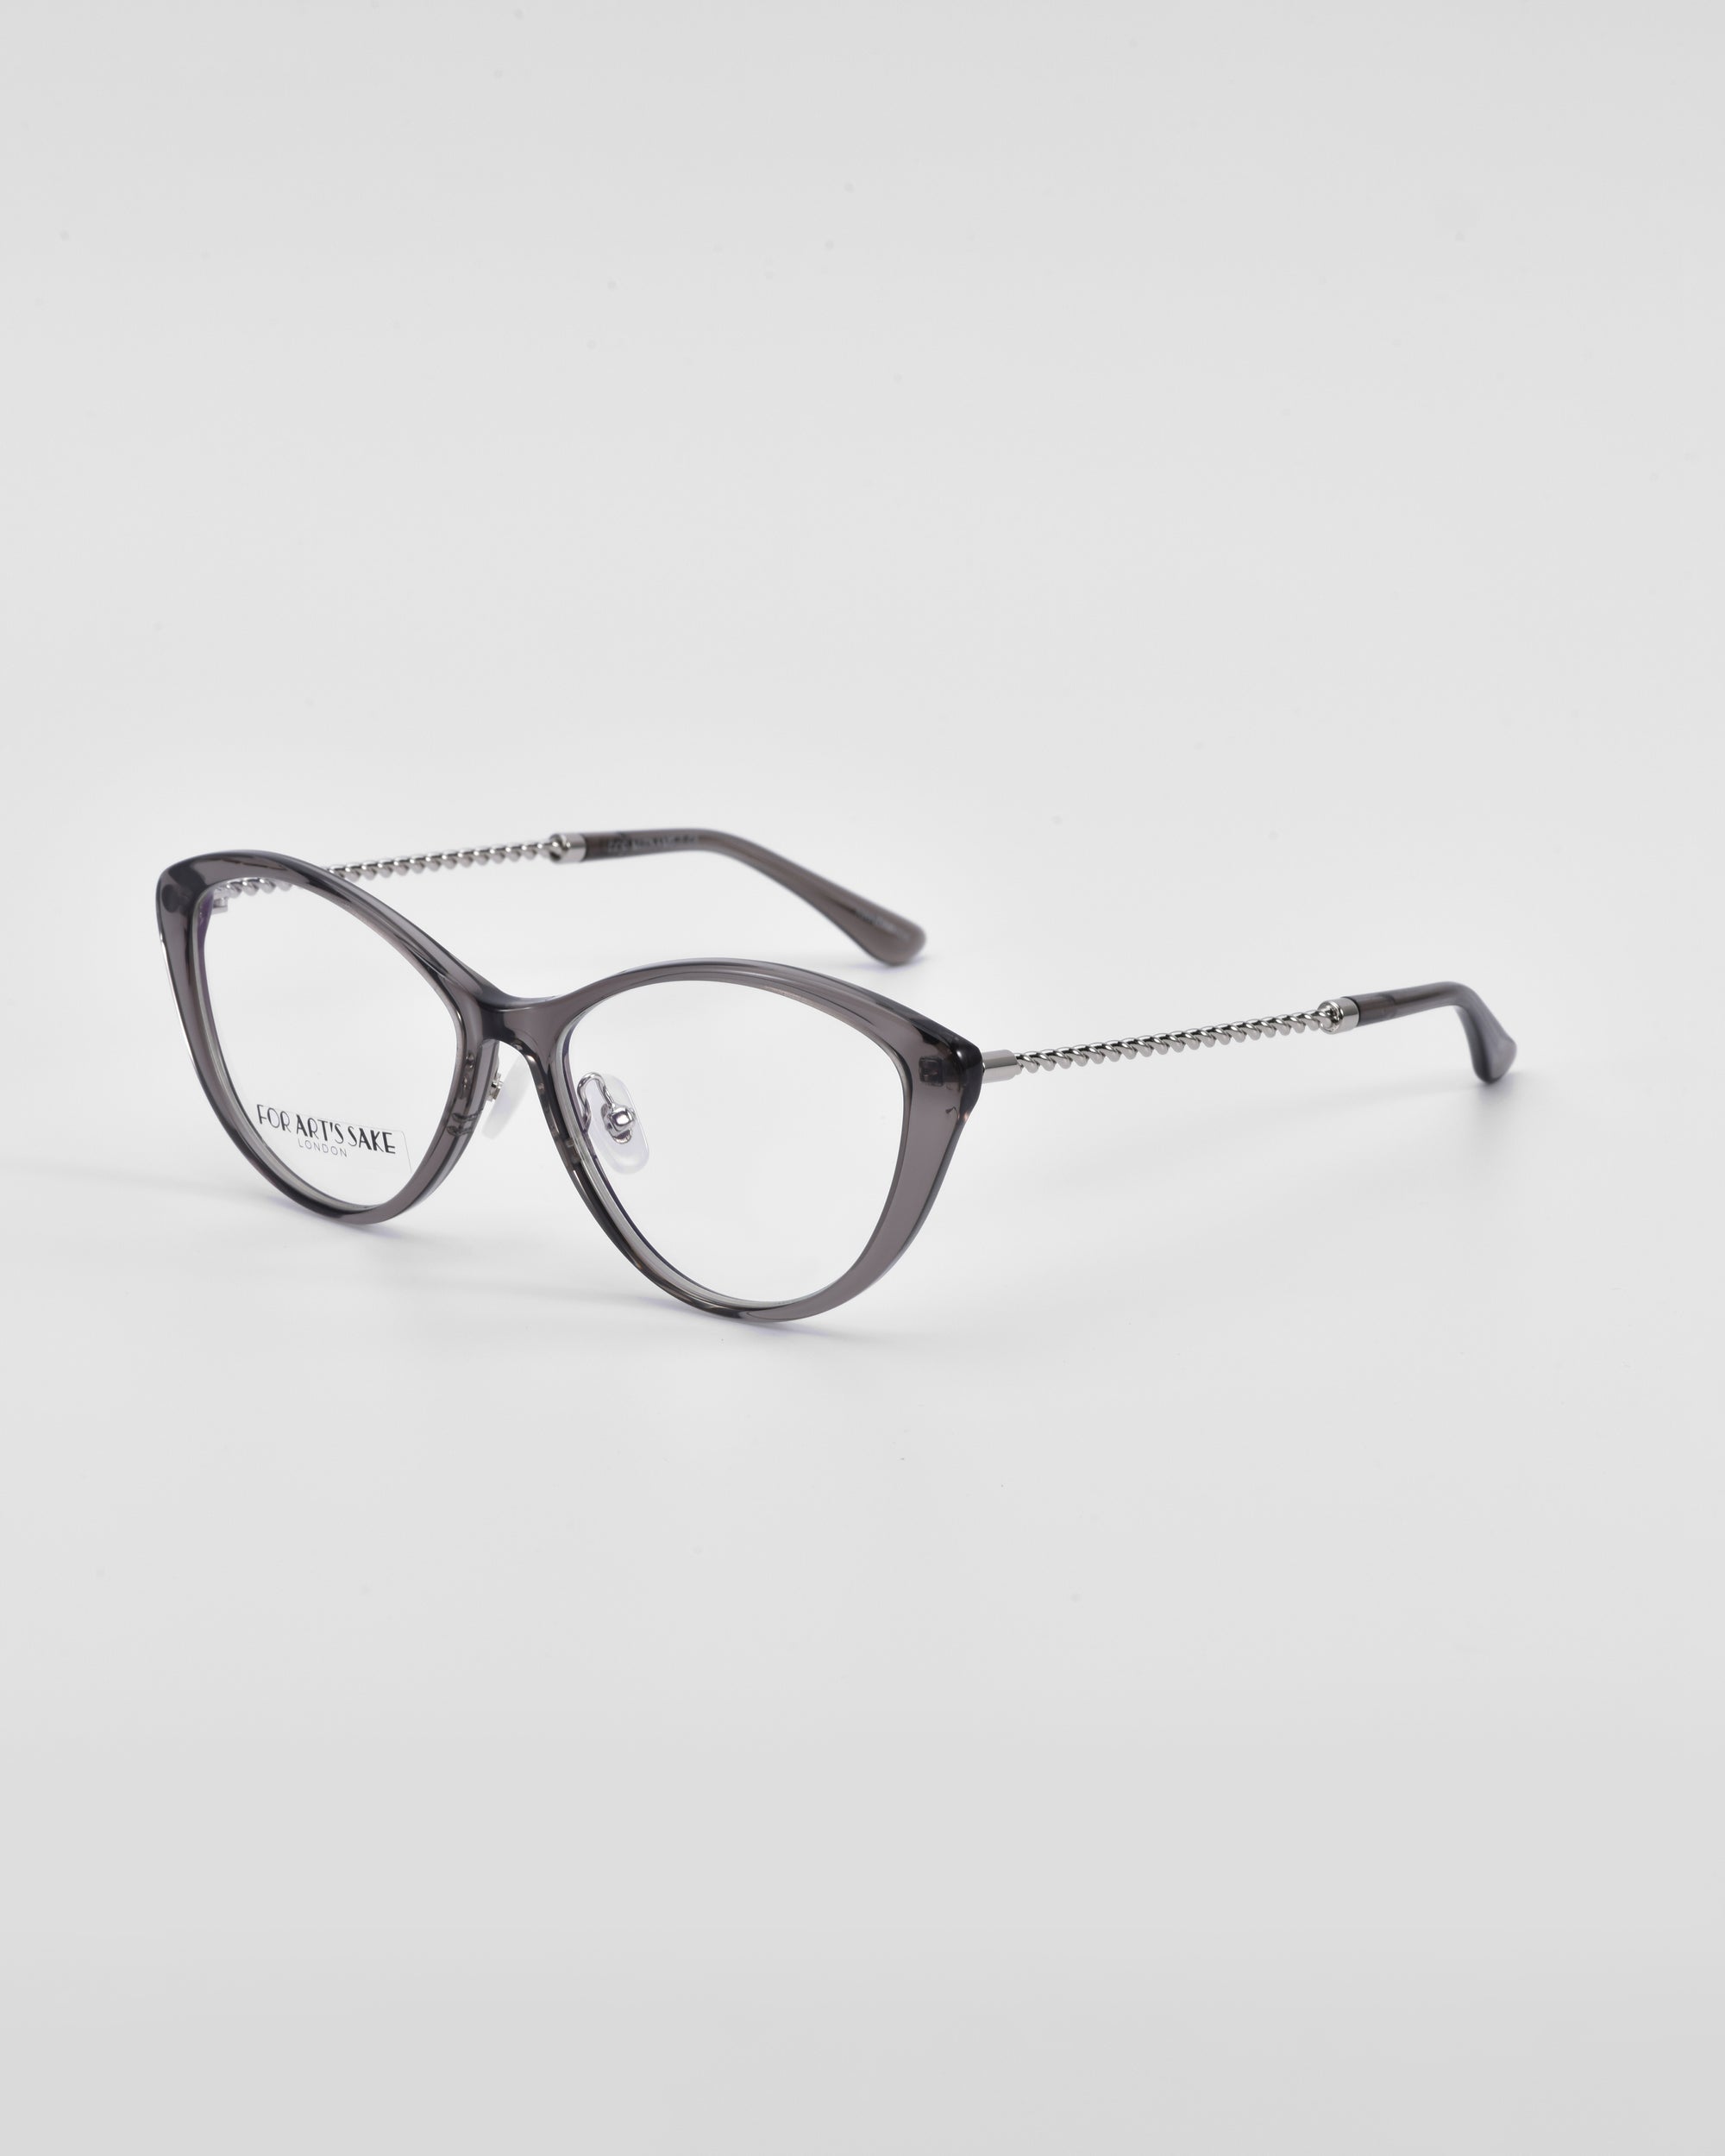 A pair of stylish Perla II eyeglasses by For Art&#39;s Sake® with a sleek black frame and a chain-like textured pattern on the temples. The lenses are clear, and the glasses feature jade-stone nose pads for added comfort. They are set against a plain white background.